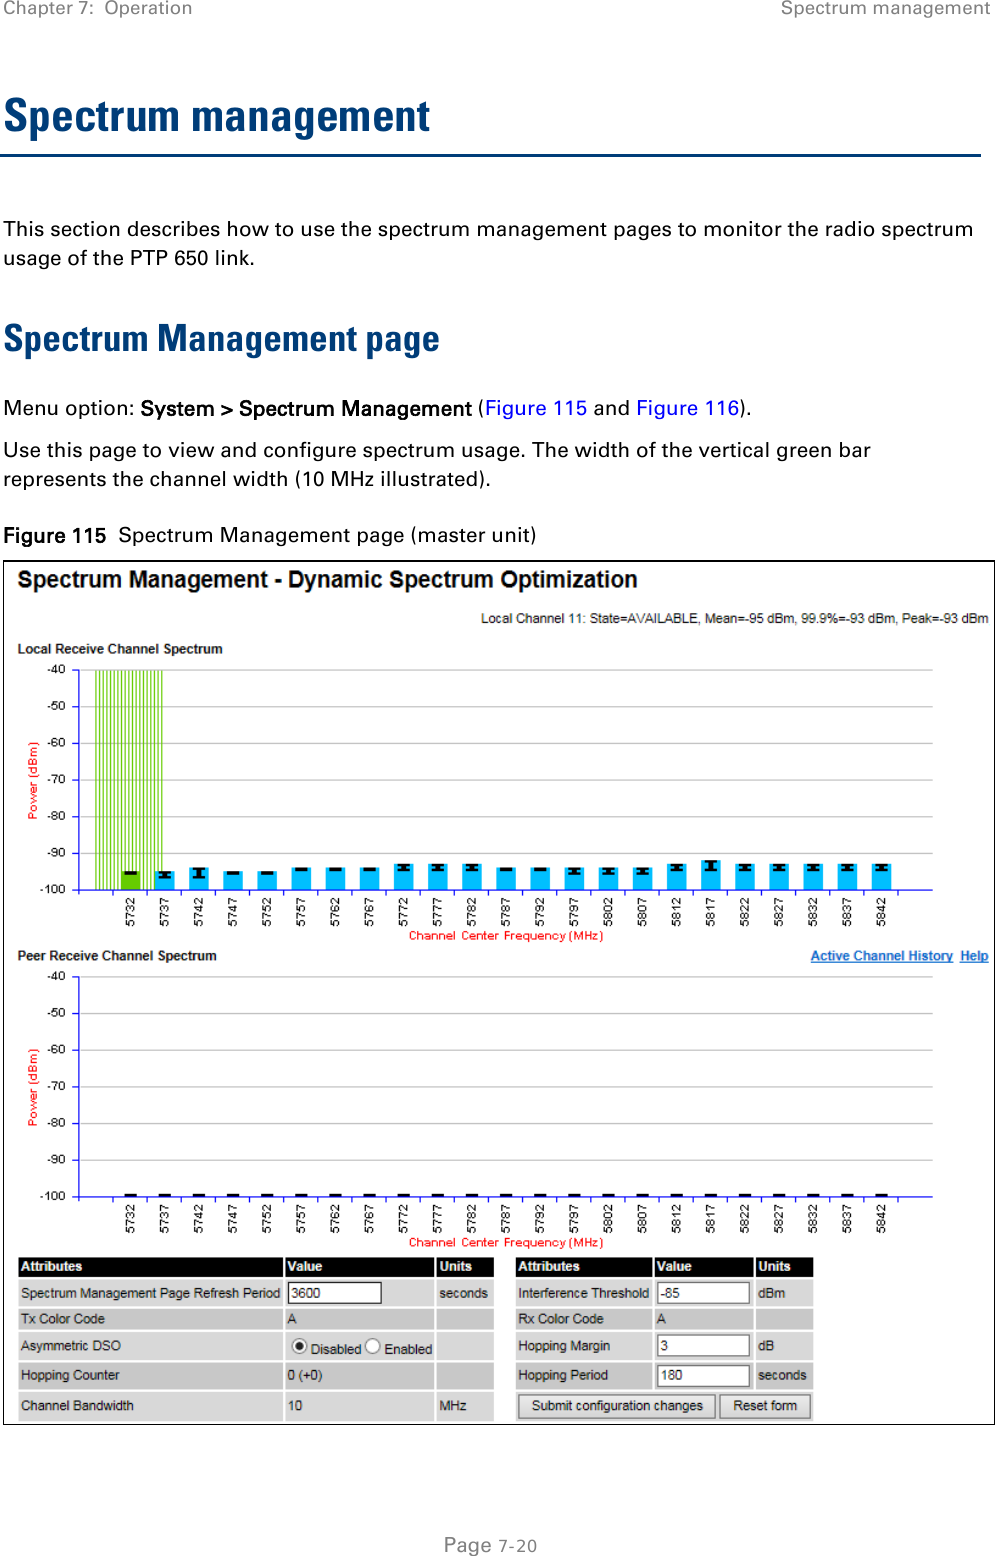 Chapter 7:  Operation Spectrum management  Spectrum management This section describes how to use the spectrum management pages to monitor the radio spectrum usage of the PTP 650 link.  Spectrum Management page Menu option: System &gt; Spectrum Management (Figure 115 and Figure 116). Use this page to view and configure spectrum usage. The width of the vertical green bar represents the channel width (10 MHz illustrated). Figure 115  Spectrum Management page (master unit)   Page 7-20 